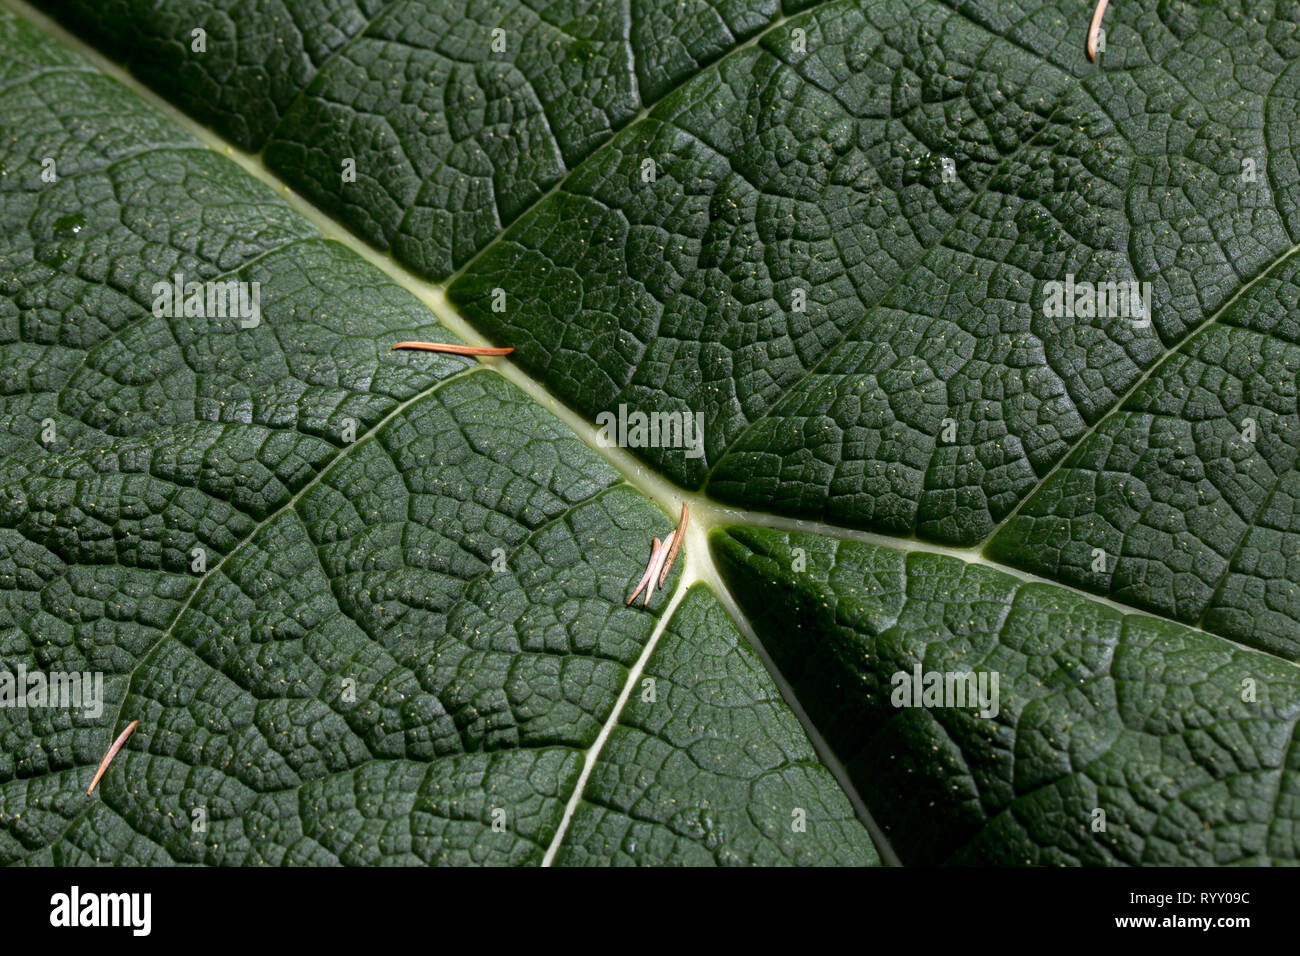 Close-up of giant rhubarb leaf looks like aerial view of grassy hills with white rivers and creeks Stock Photo